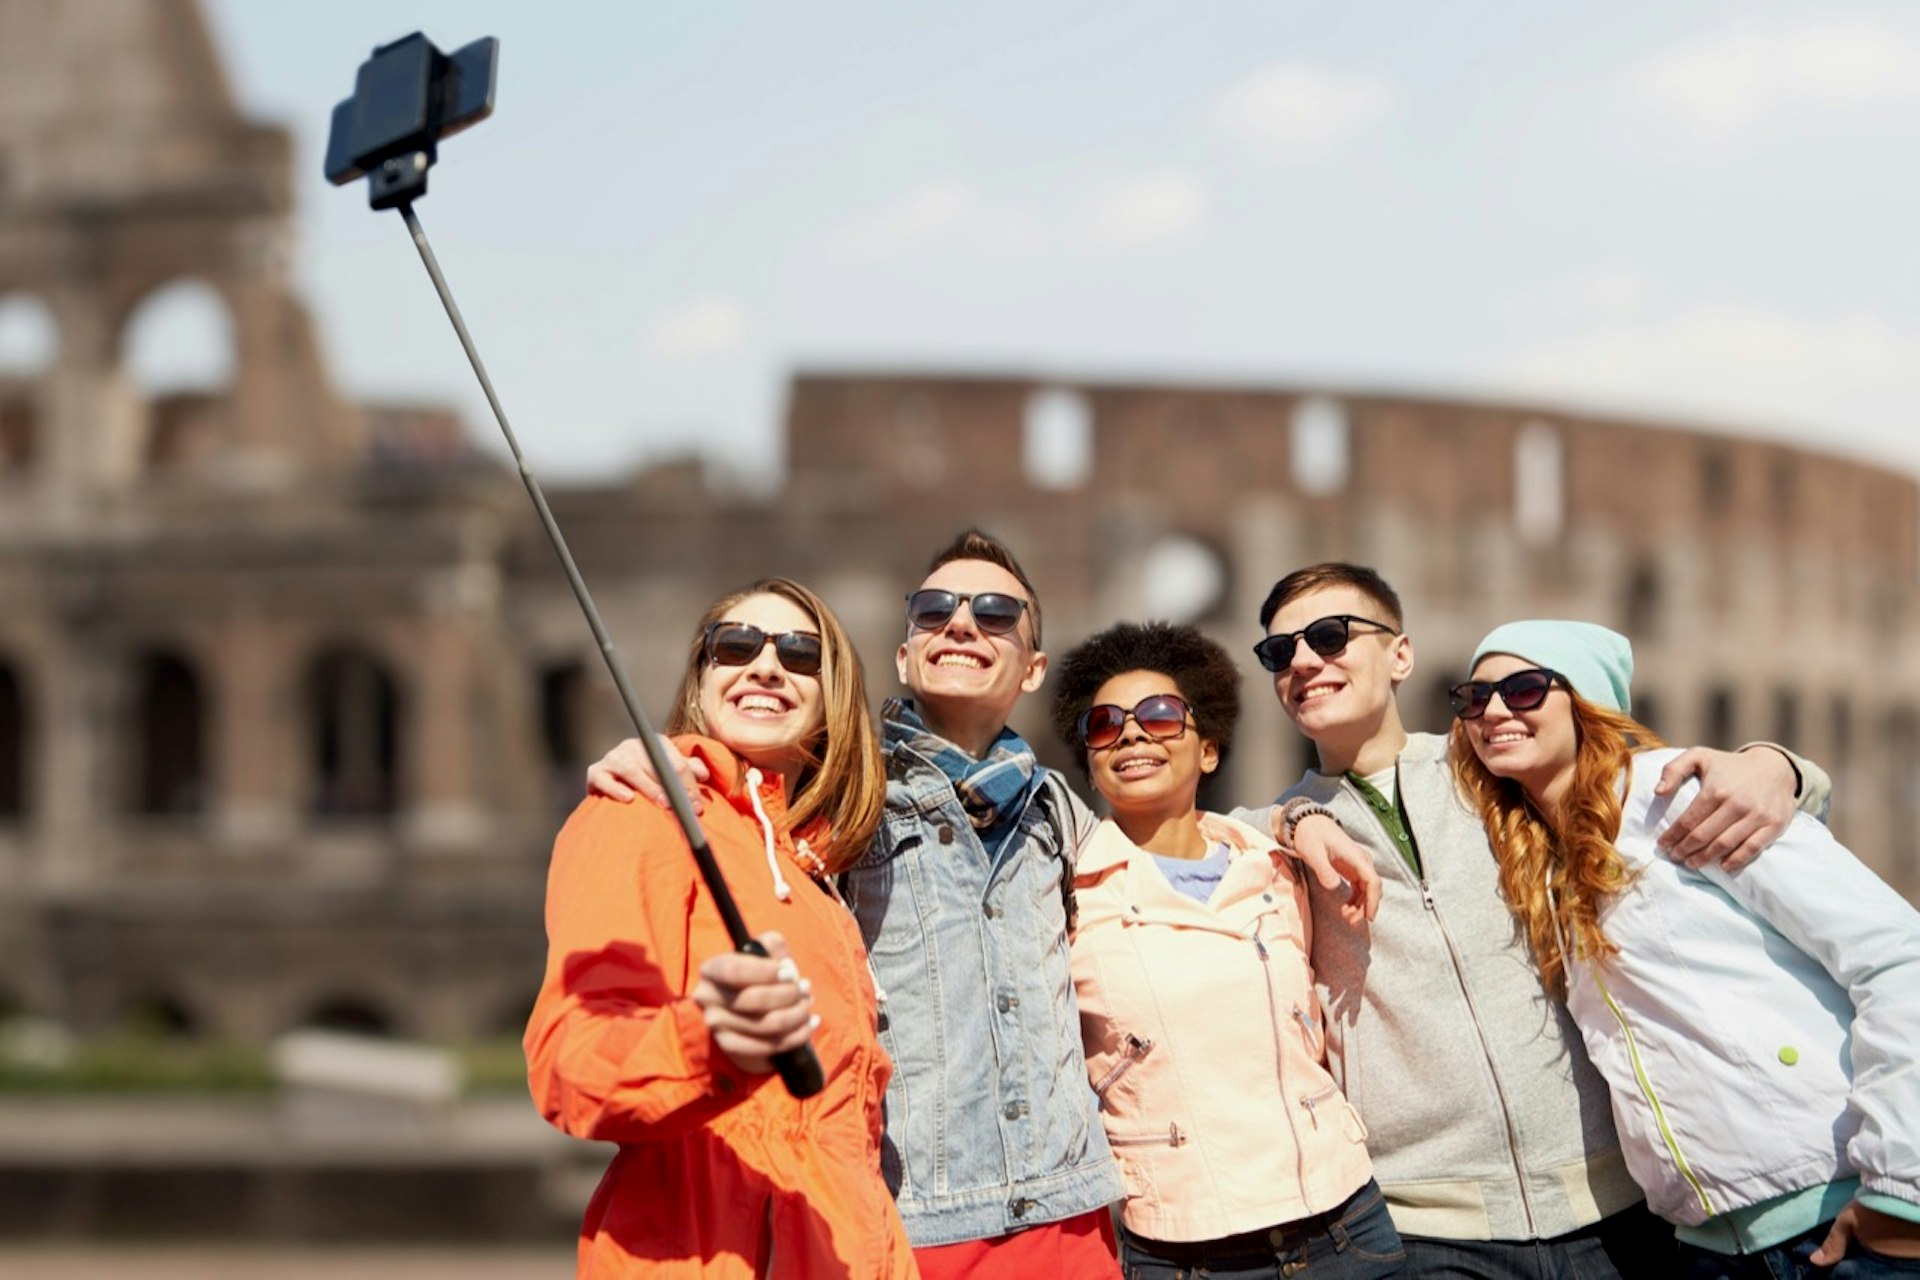 Group of smiling friends taking a selfie with smartphone and monopod with Coliseum ruins in background